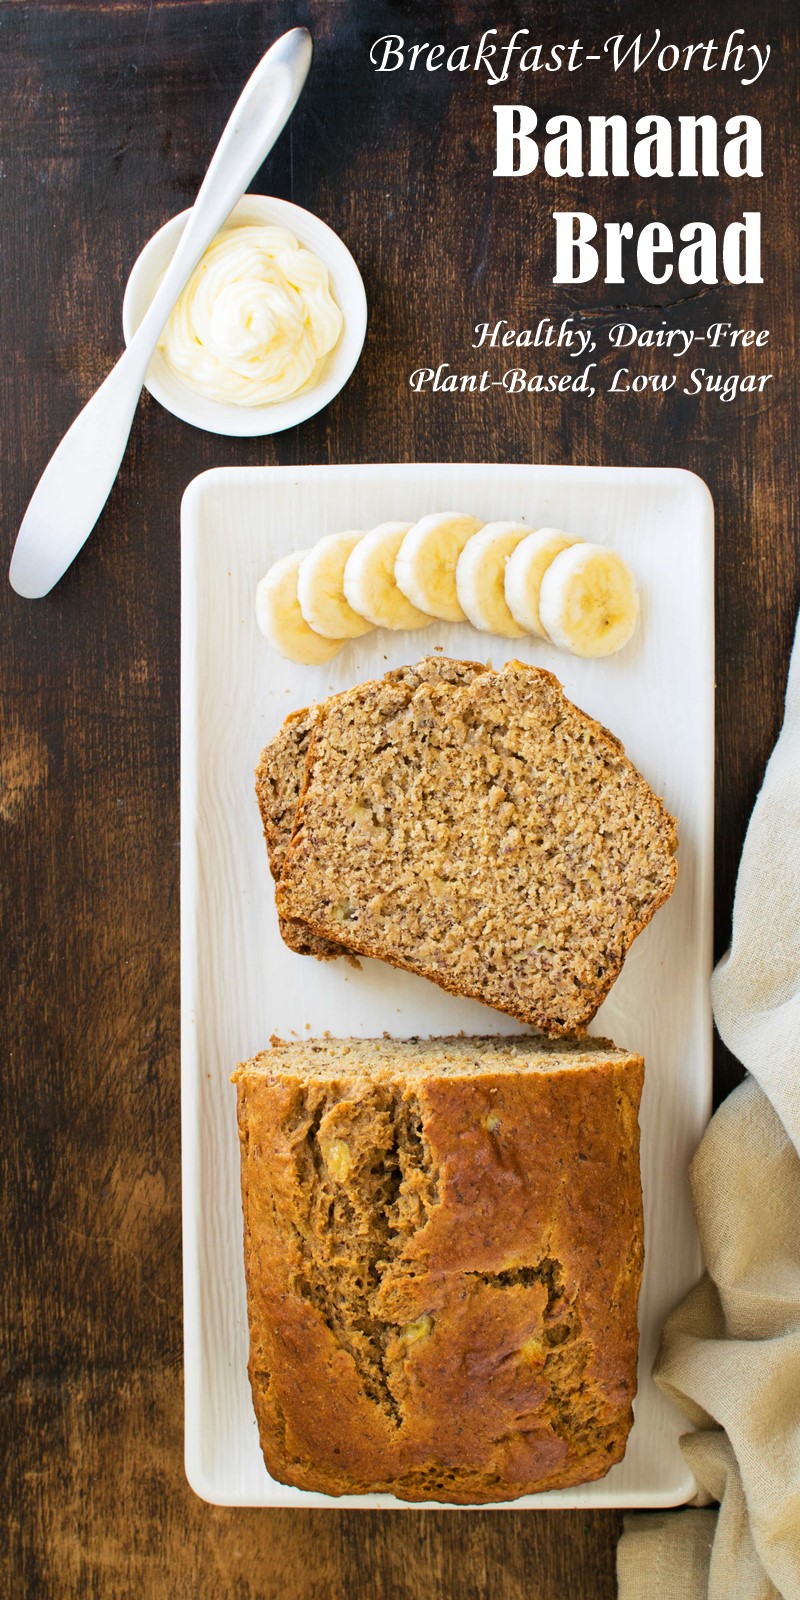 Breakfast-Worthy Banana Bread - The Guilt-Free Recipe You've Been Waiting For (plant-based, no added sugar (with options), wholesome)